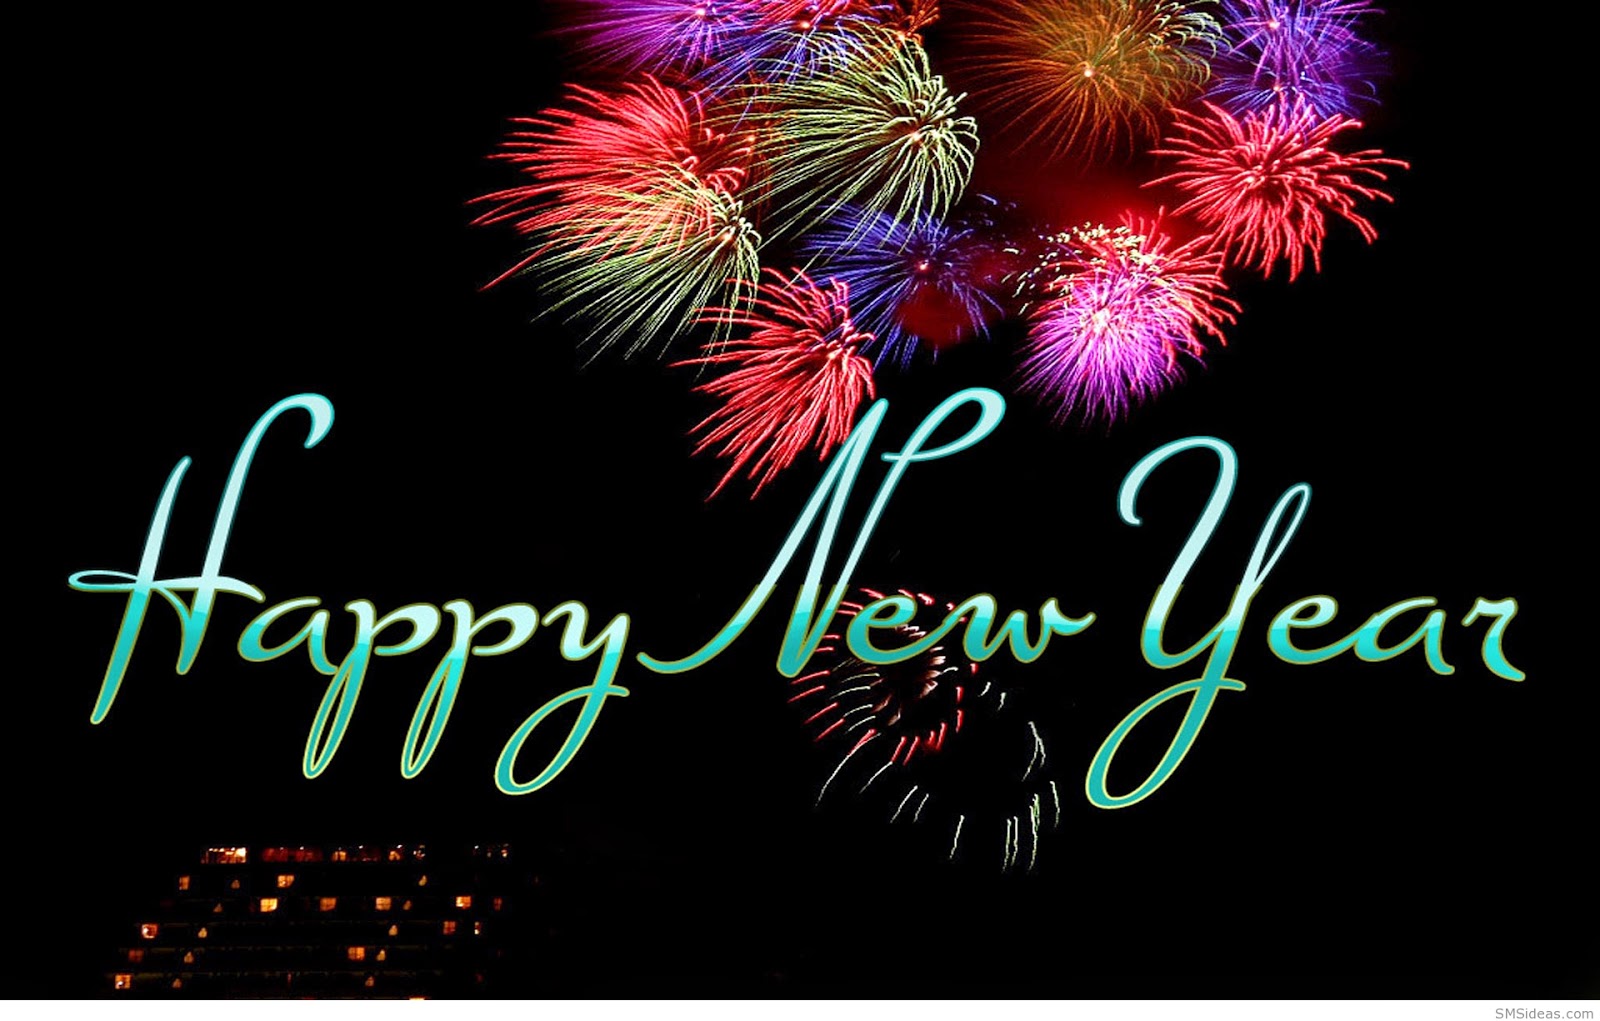 Happy New Year 2016 hd Images, Wallpapers 